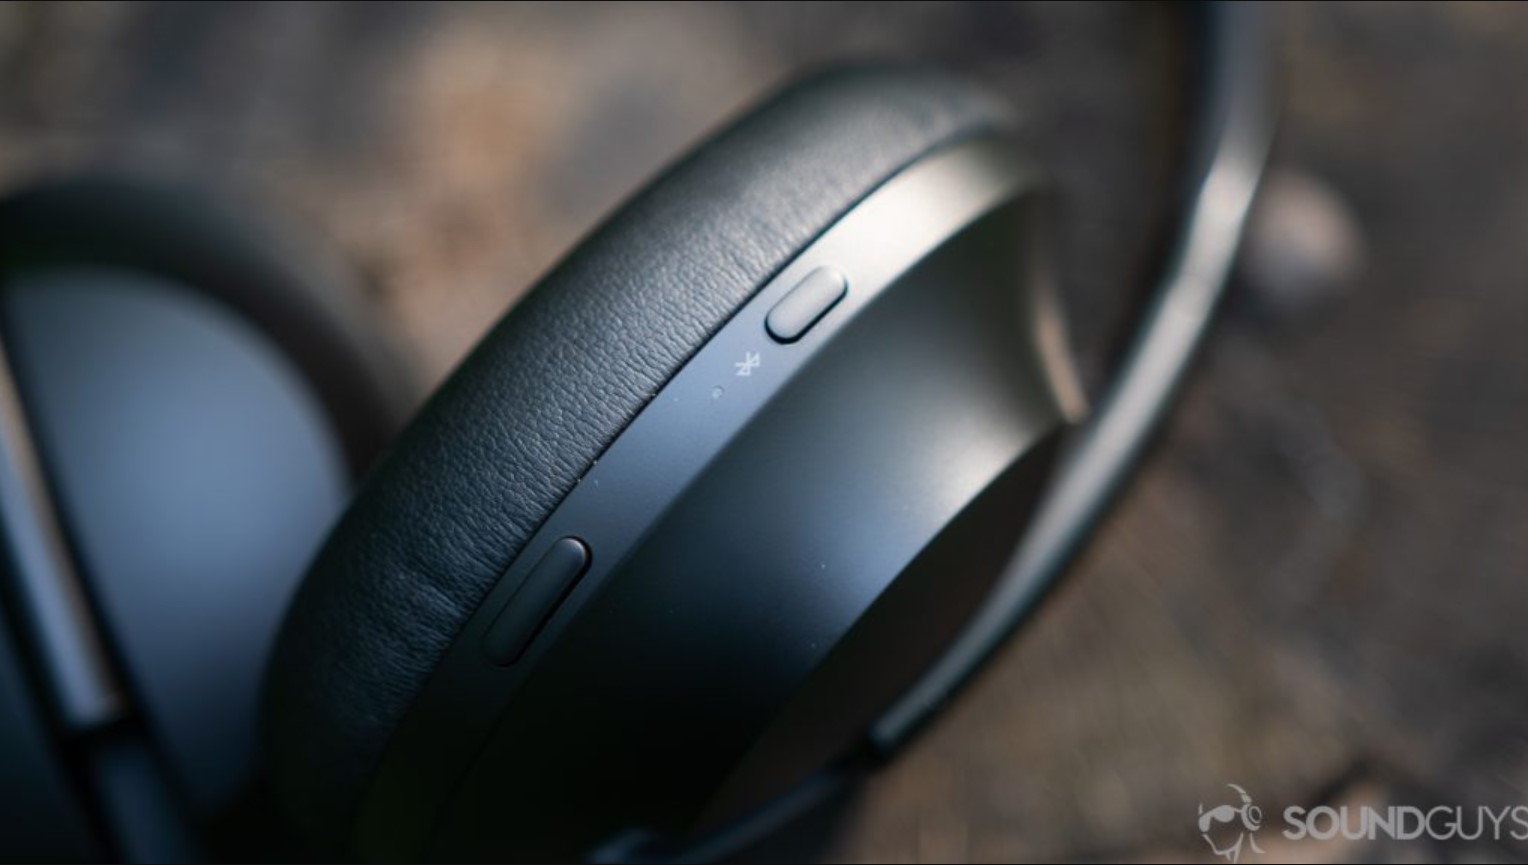 An image of the button controls on the Bose NC Headphones 700